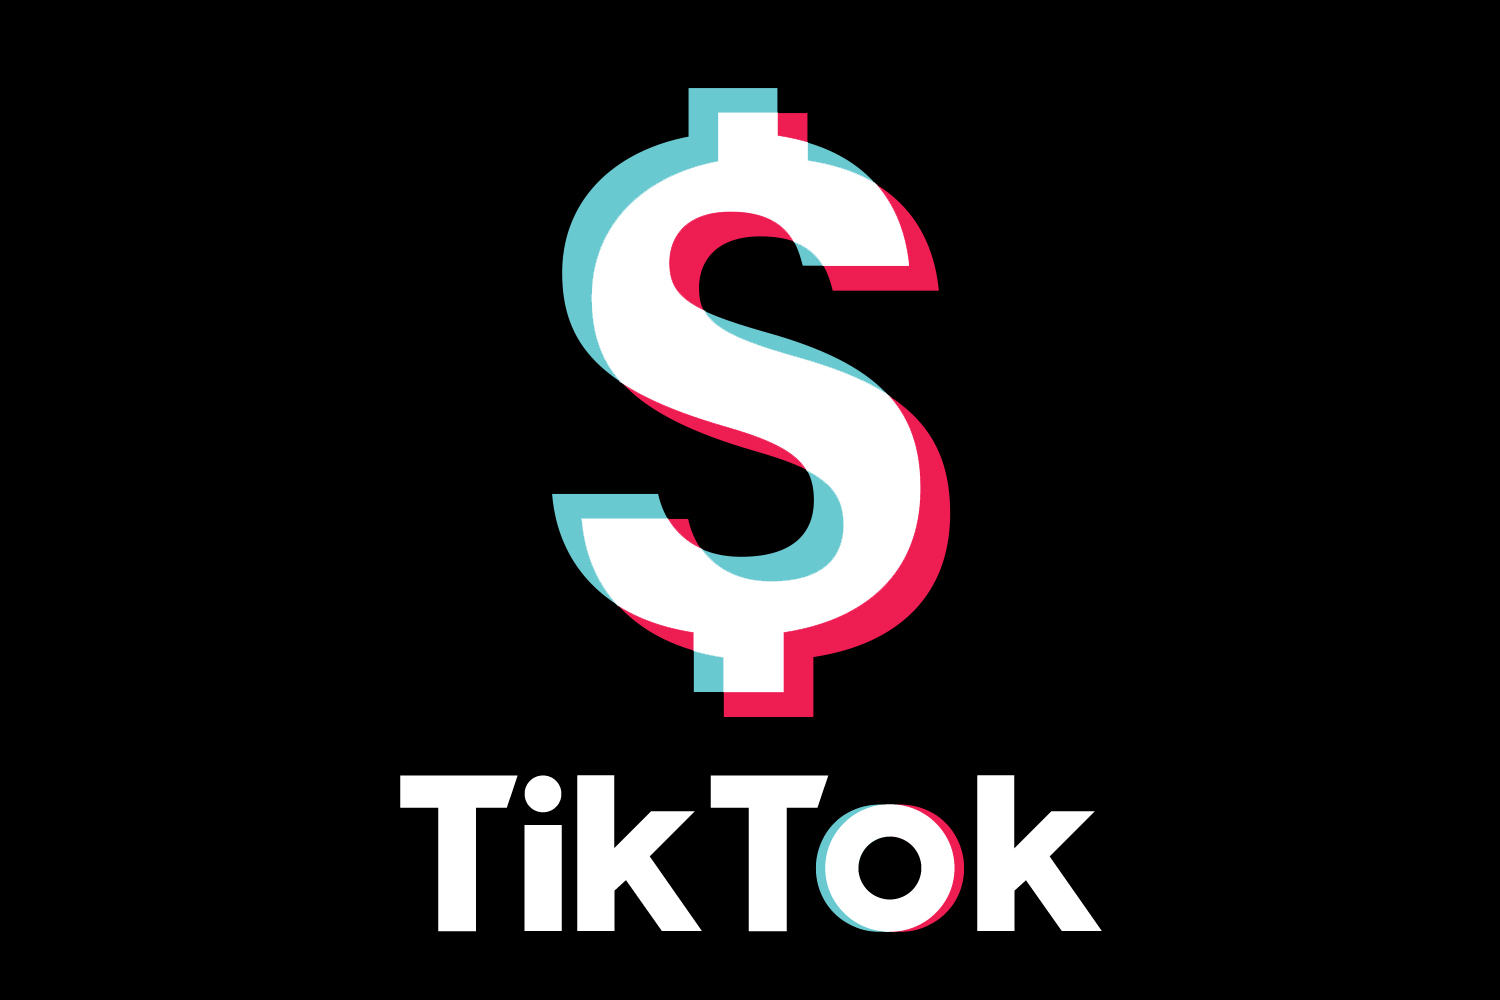 TikTok’s parent company ByteDance generated $17bn in 2019, more than YouTube’s ad-revenue